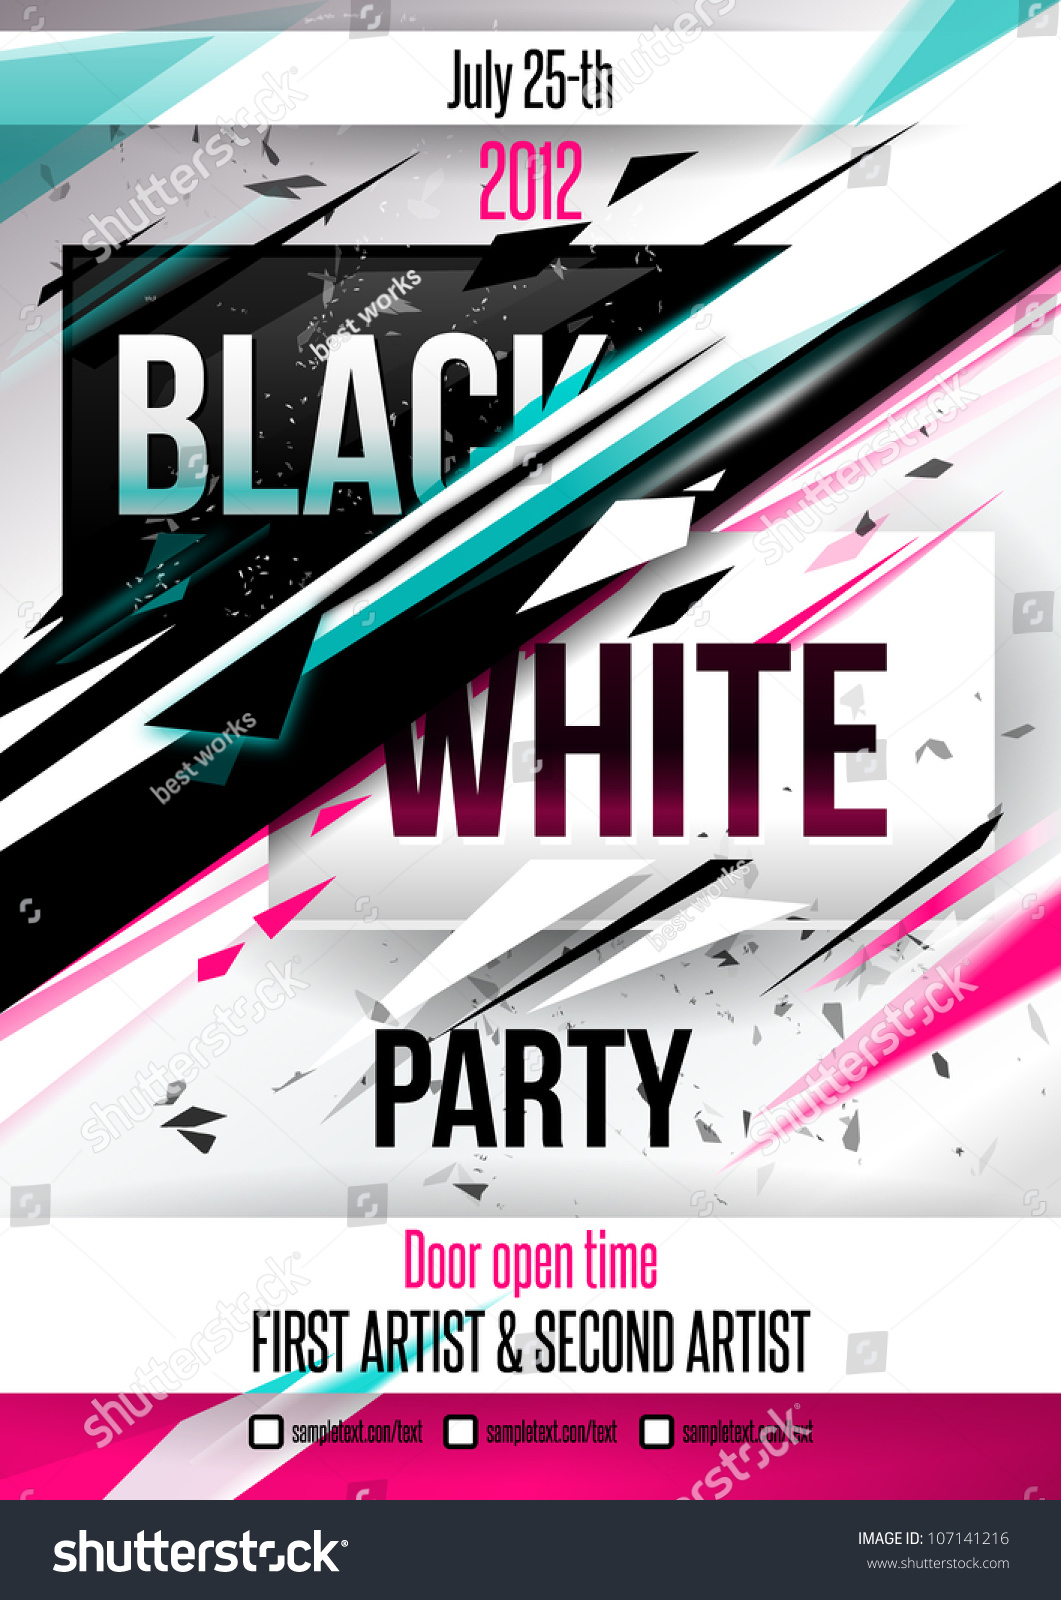 party-poster-template-vector-107141216-shutterstock